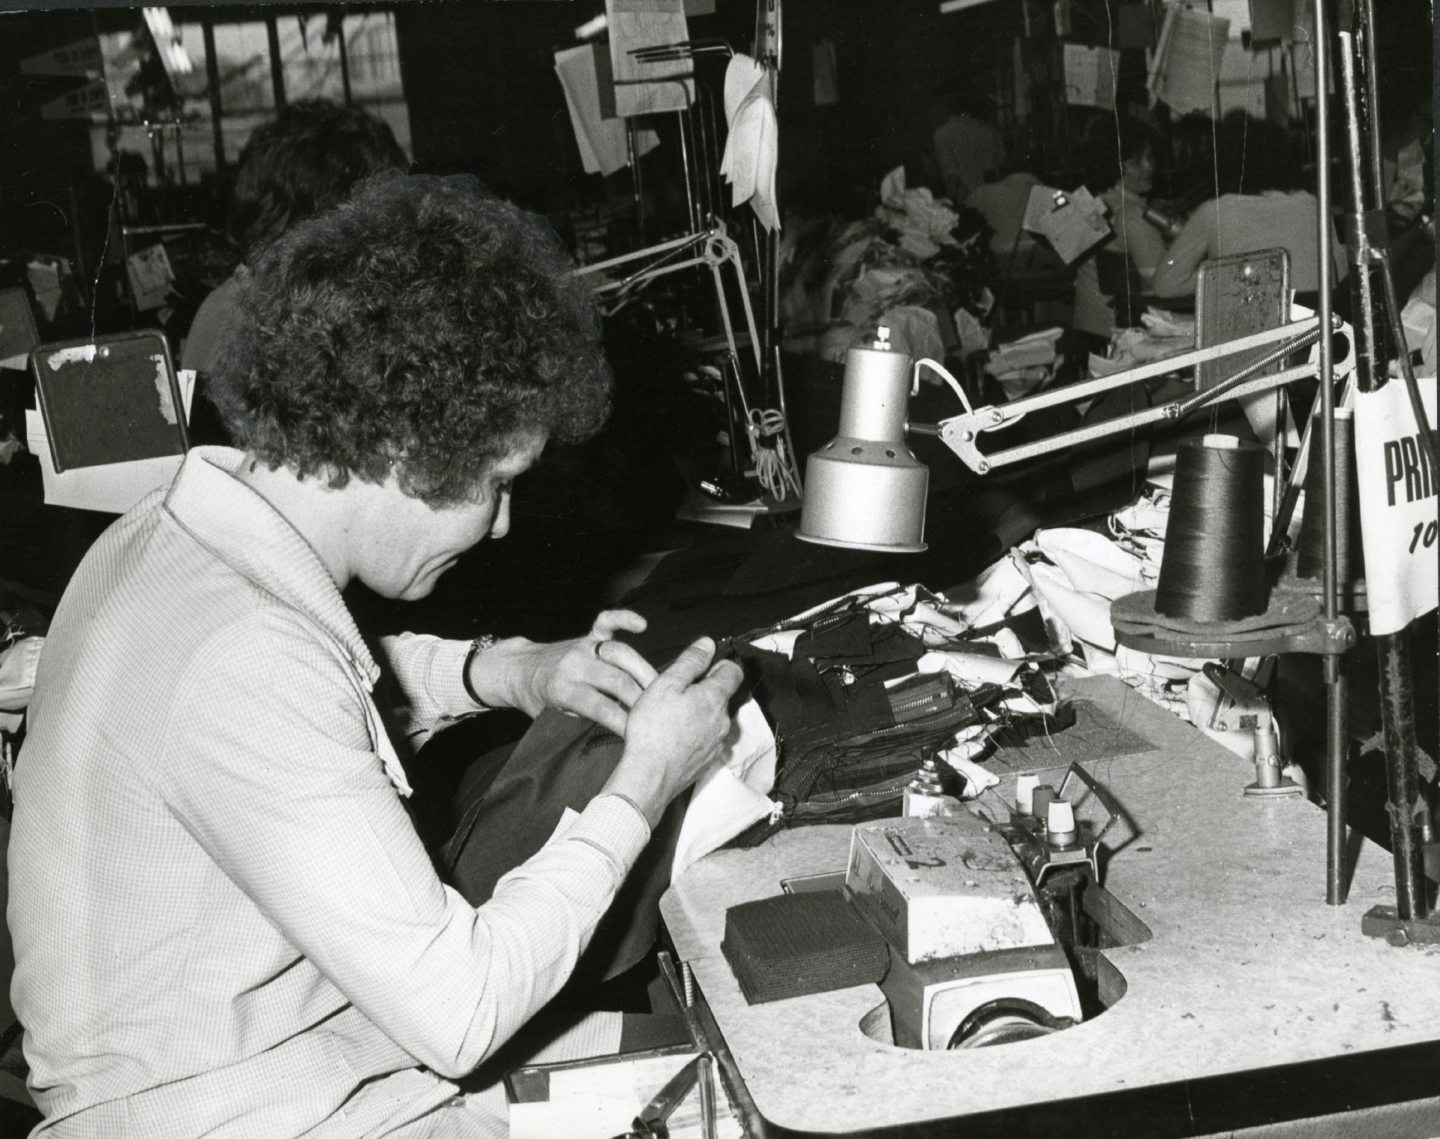 Barbara Burns at work in the Levi Strauss factory in 1979.